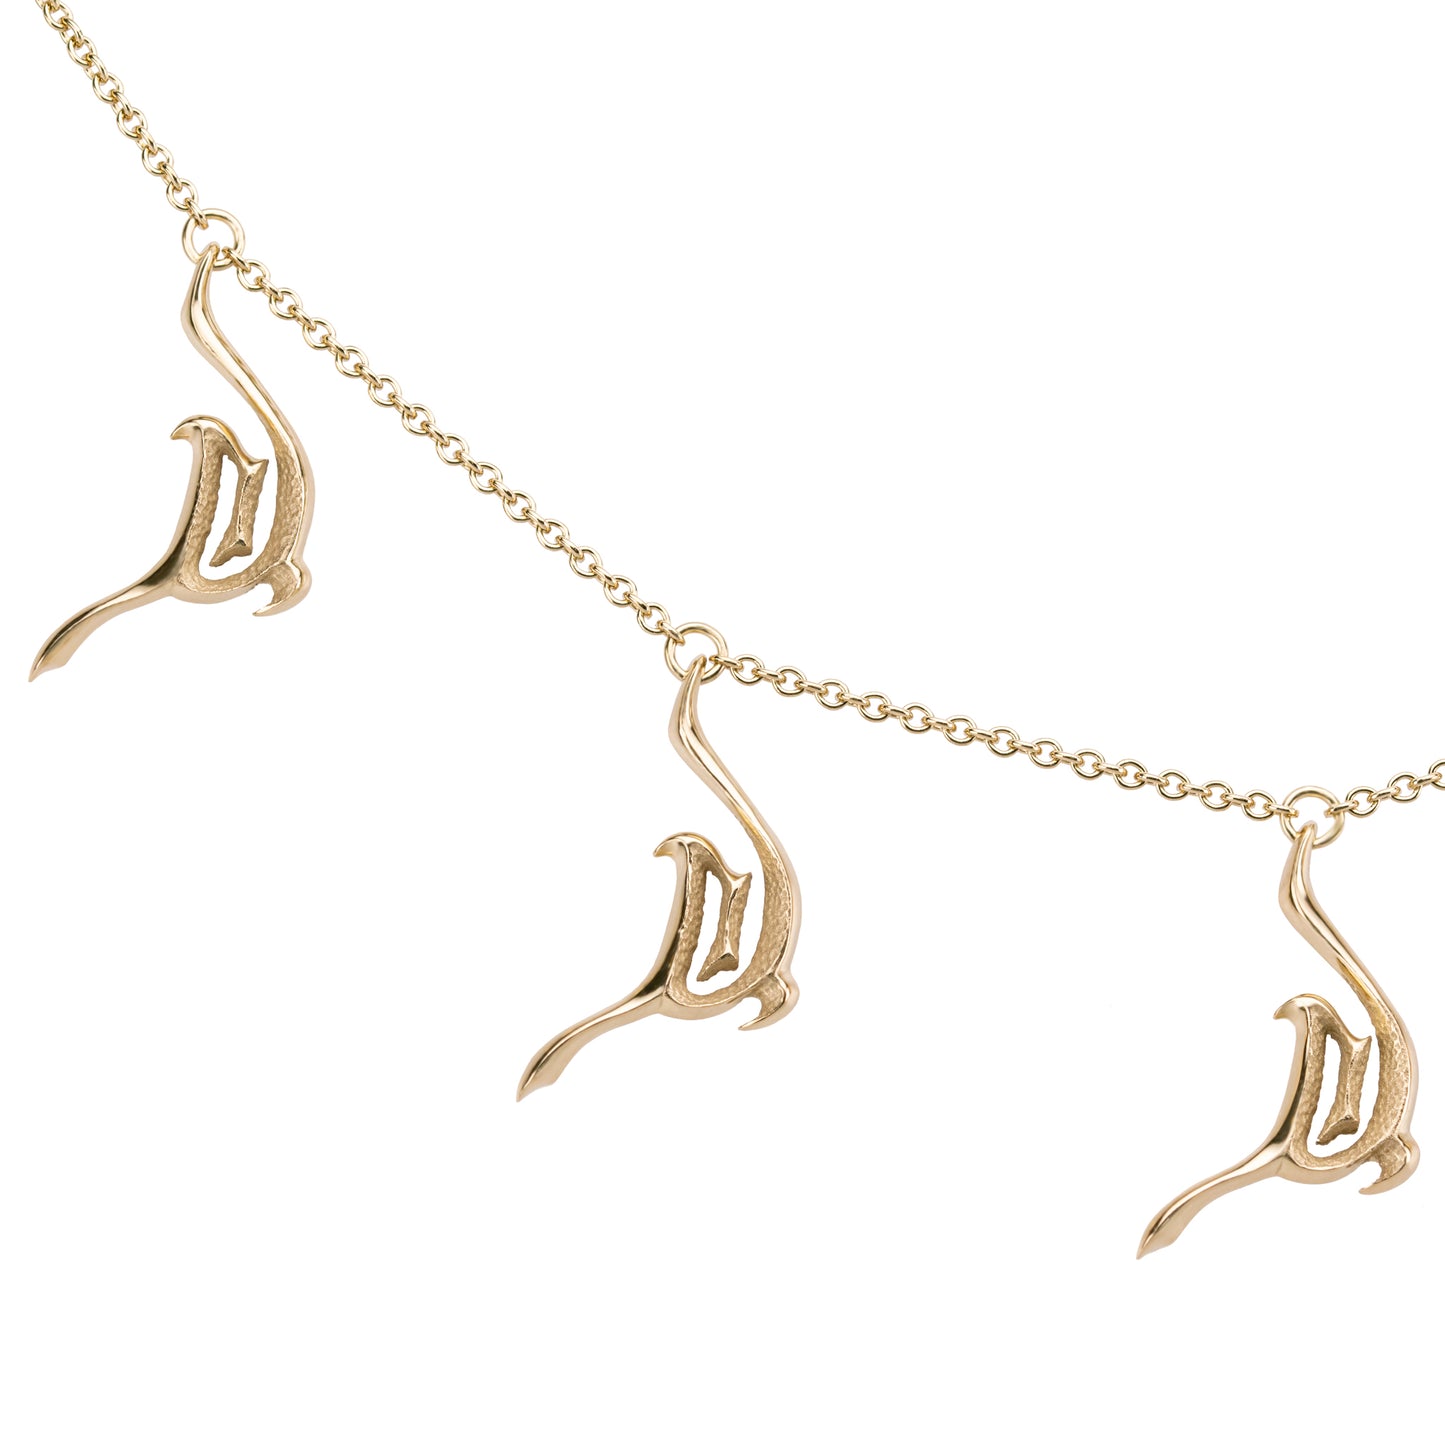 Orme-Brown Fine Contemporary Jewellery Sand Steps Necklace Charm Lizard Track 18ct Yellow Gold Fairmined Eco Sustainable Ethical